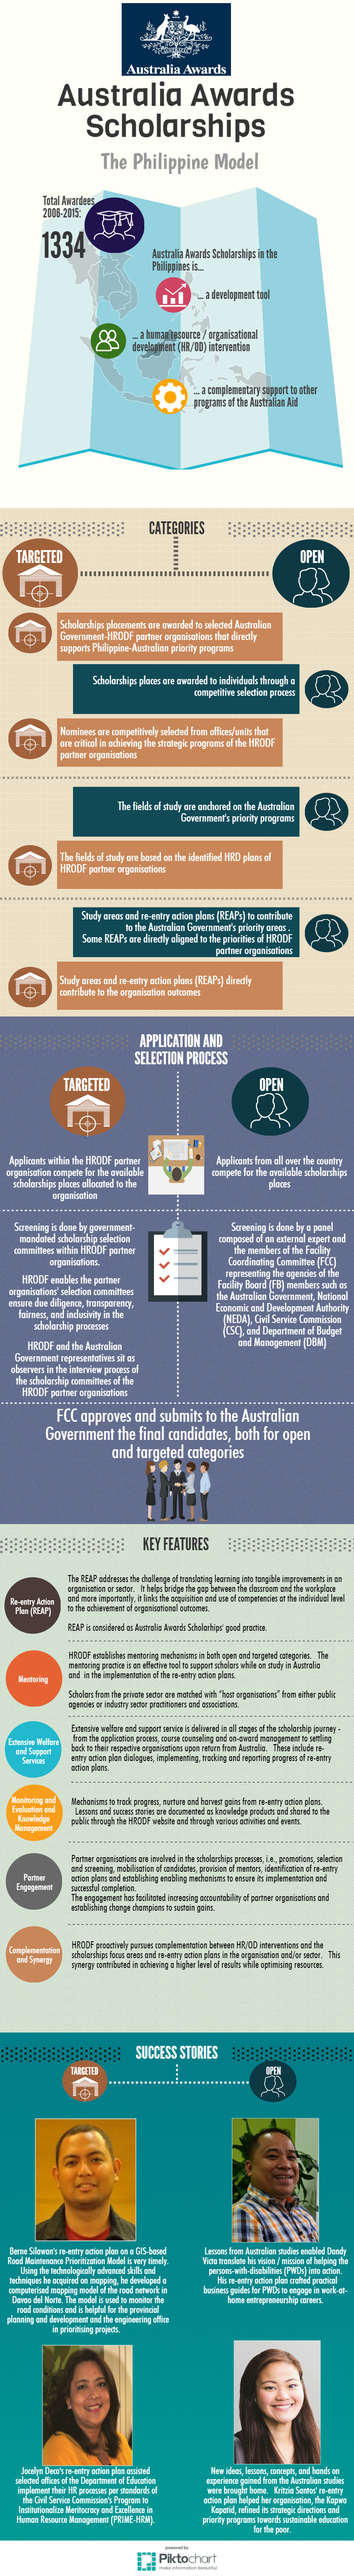 HRODF - Australia Awards Scholarships in the Philippines - Infographic